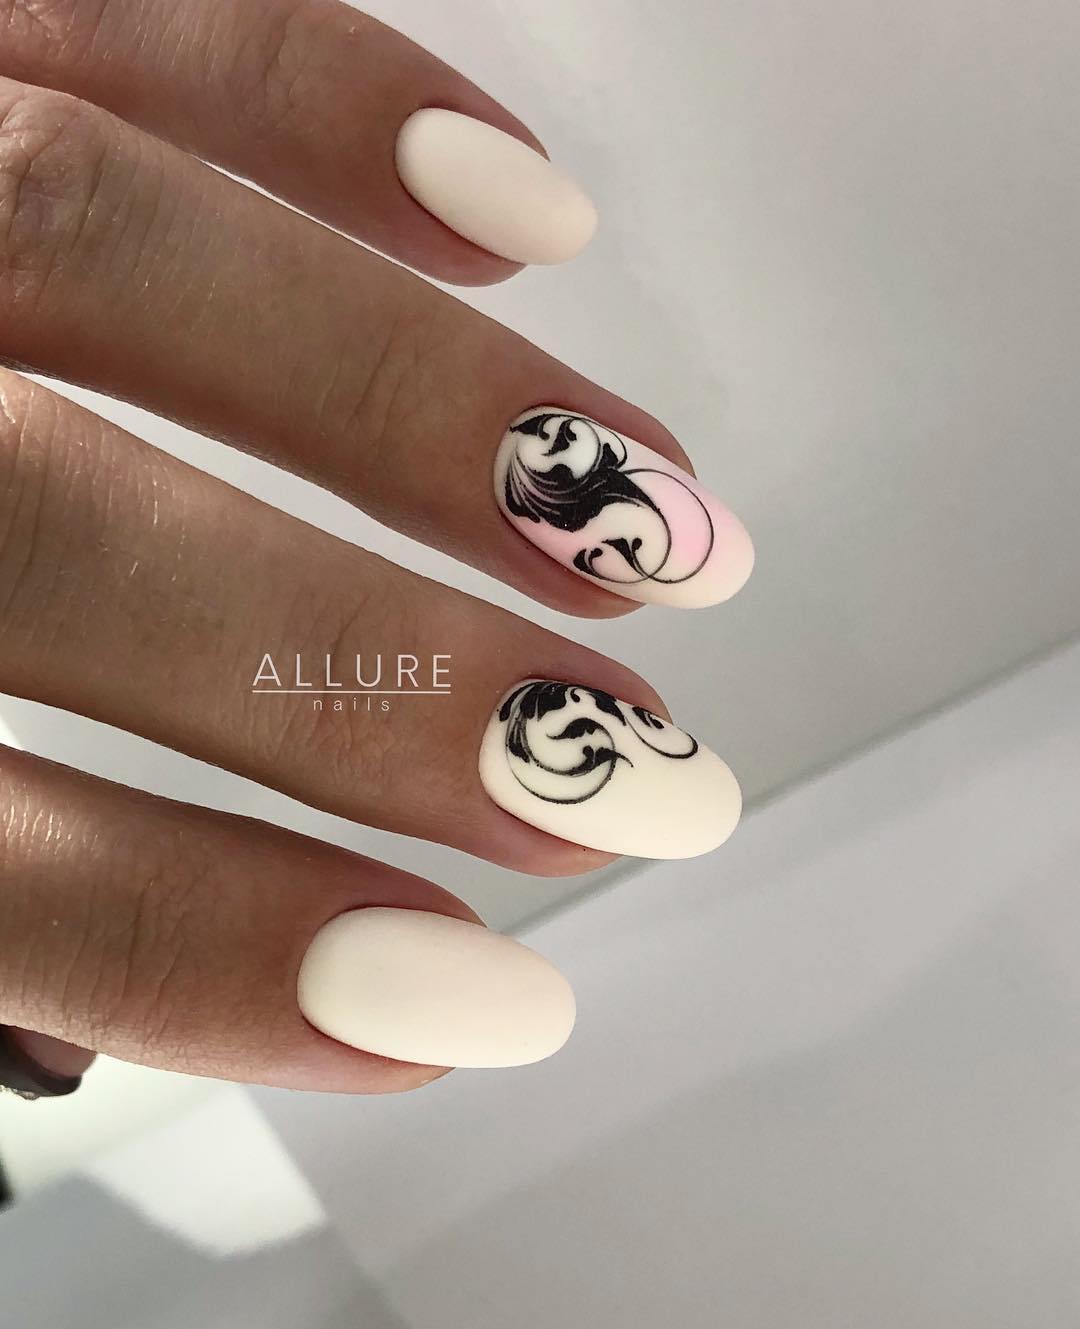 32 Extraordinary White Acrylic Nail Designs to Finish Your Trendy Look - White Oval Acrylic Nails